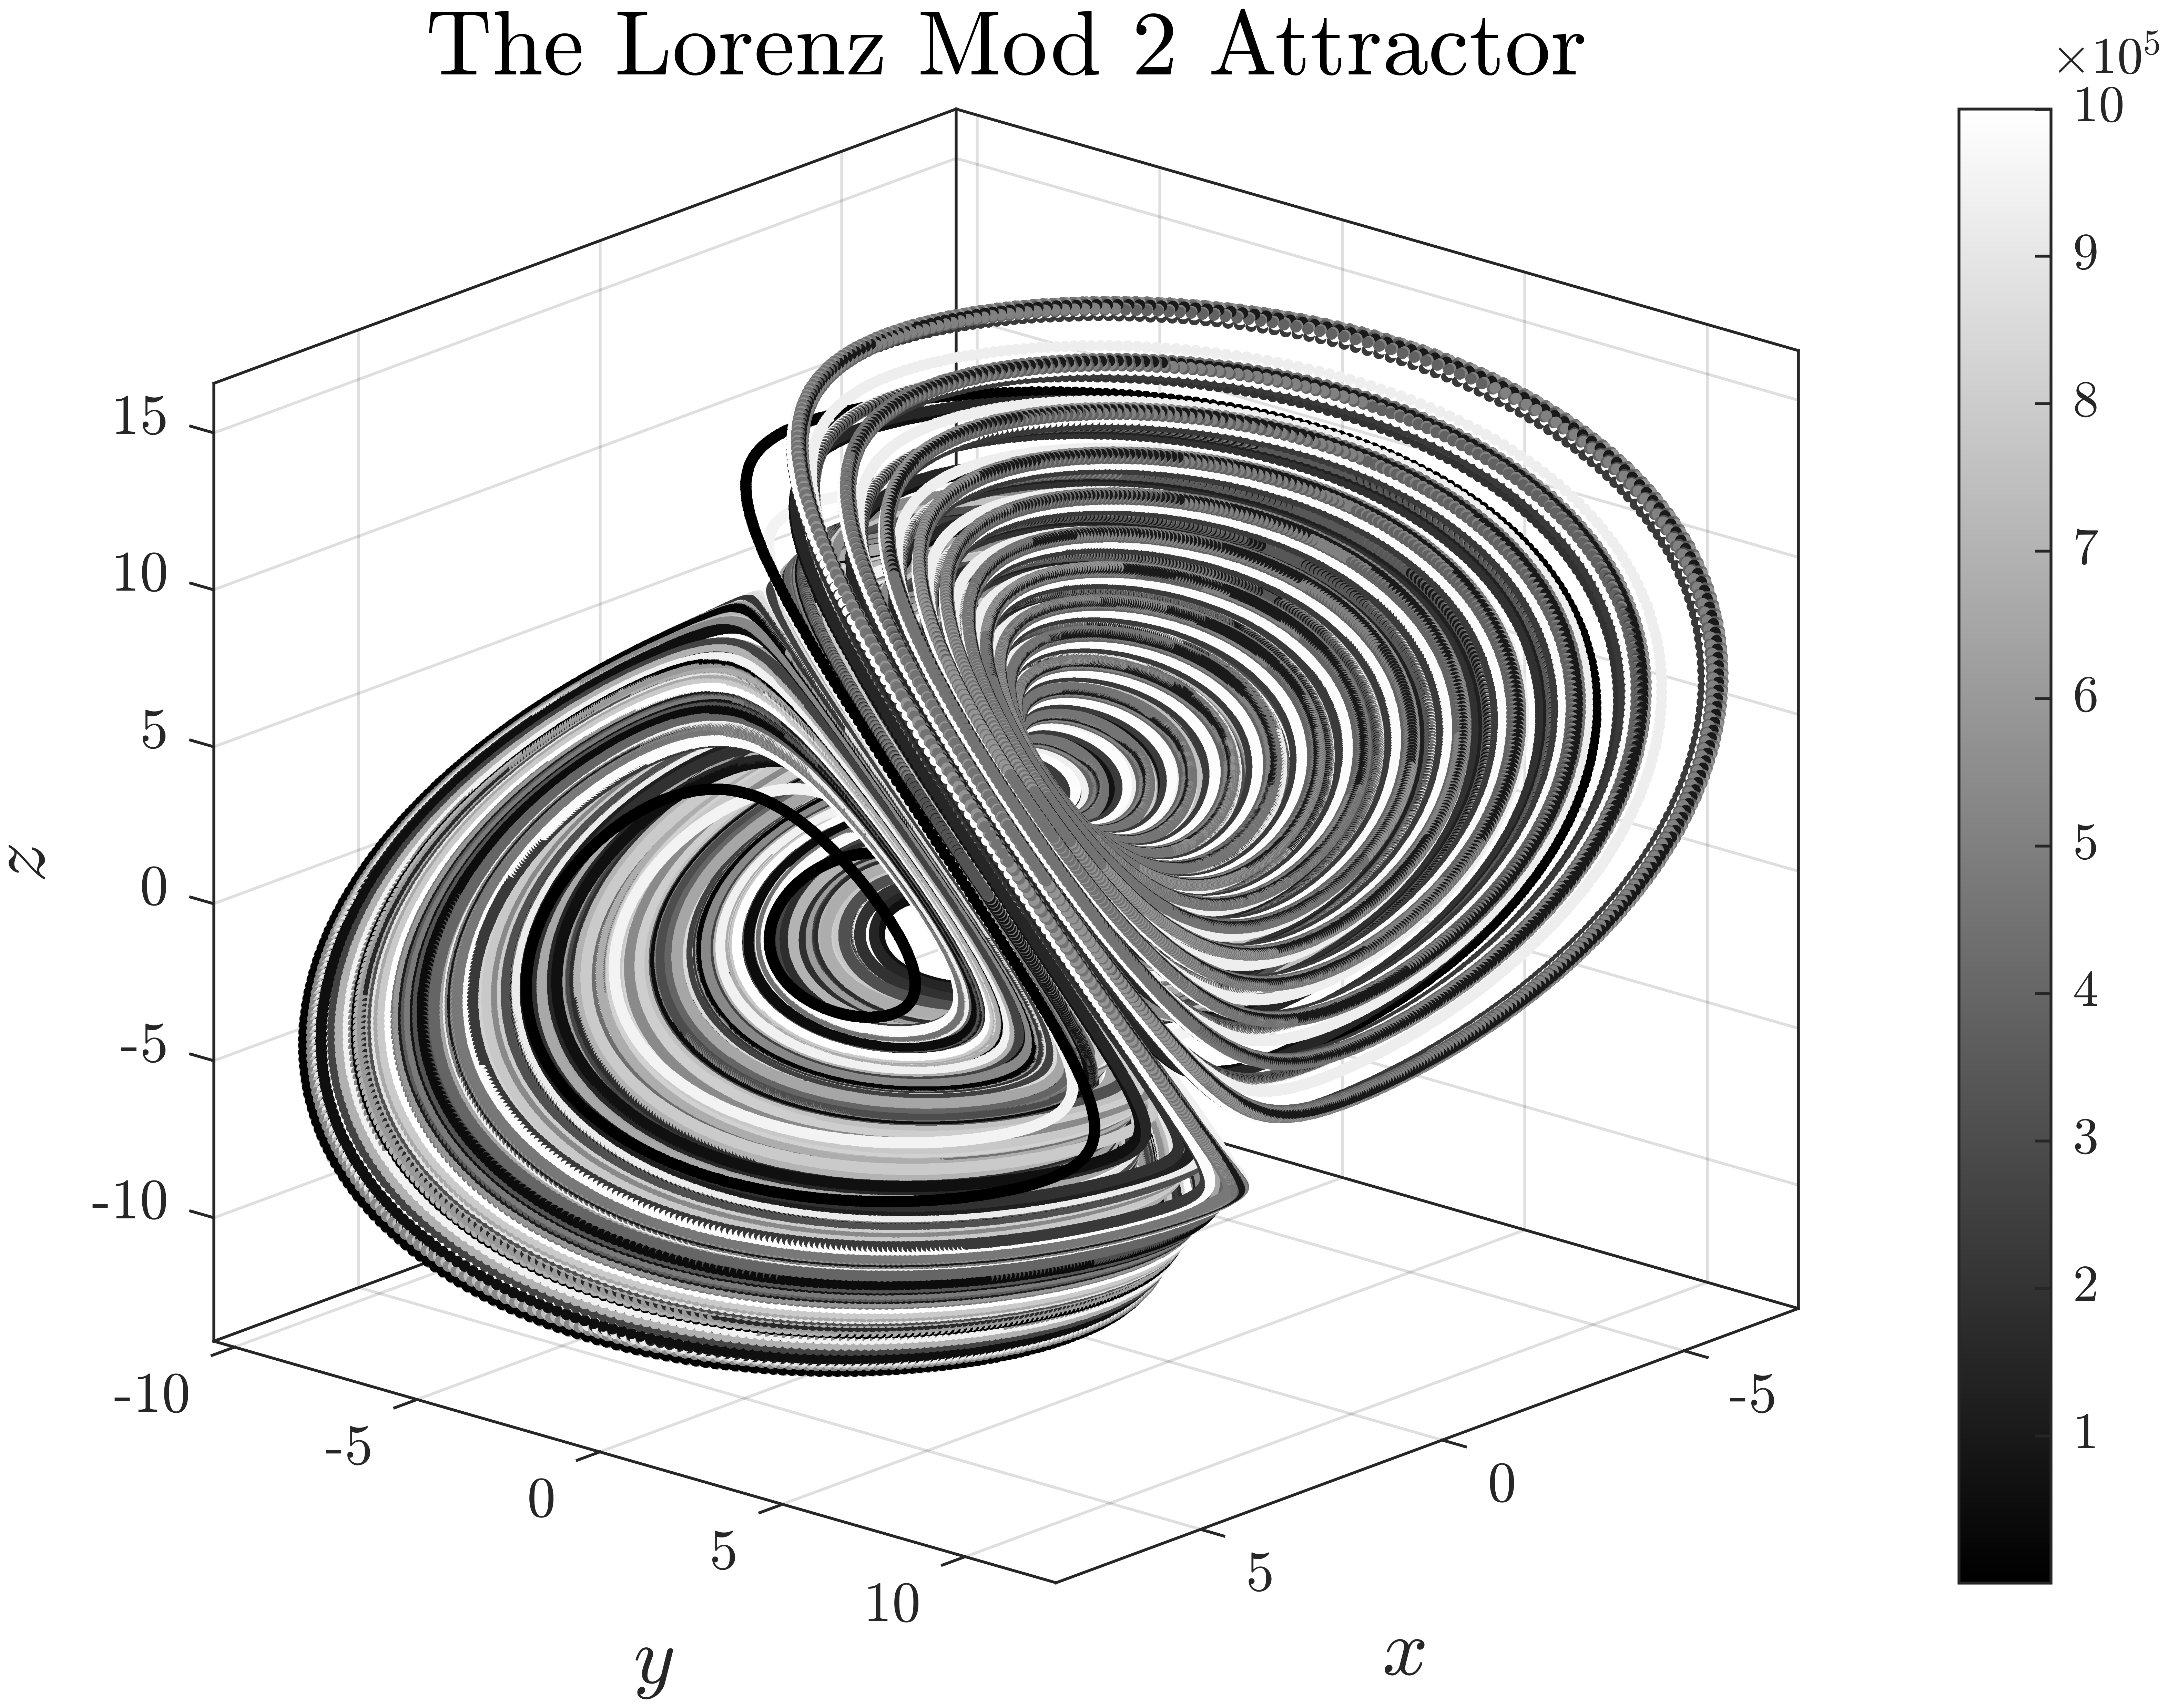 The_Lorenz_Mod_2_Attractor.png